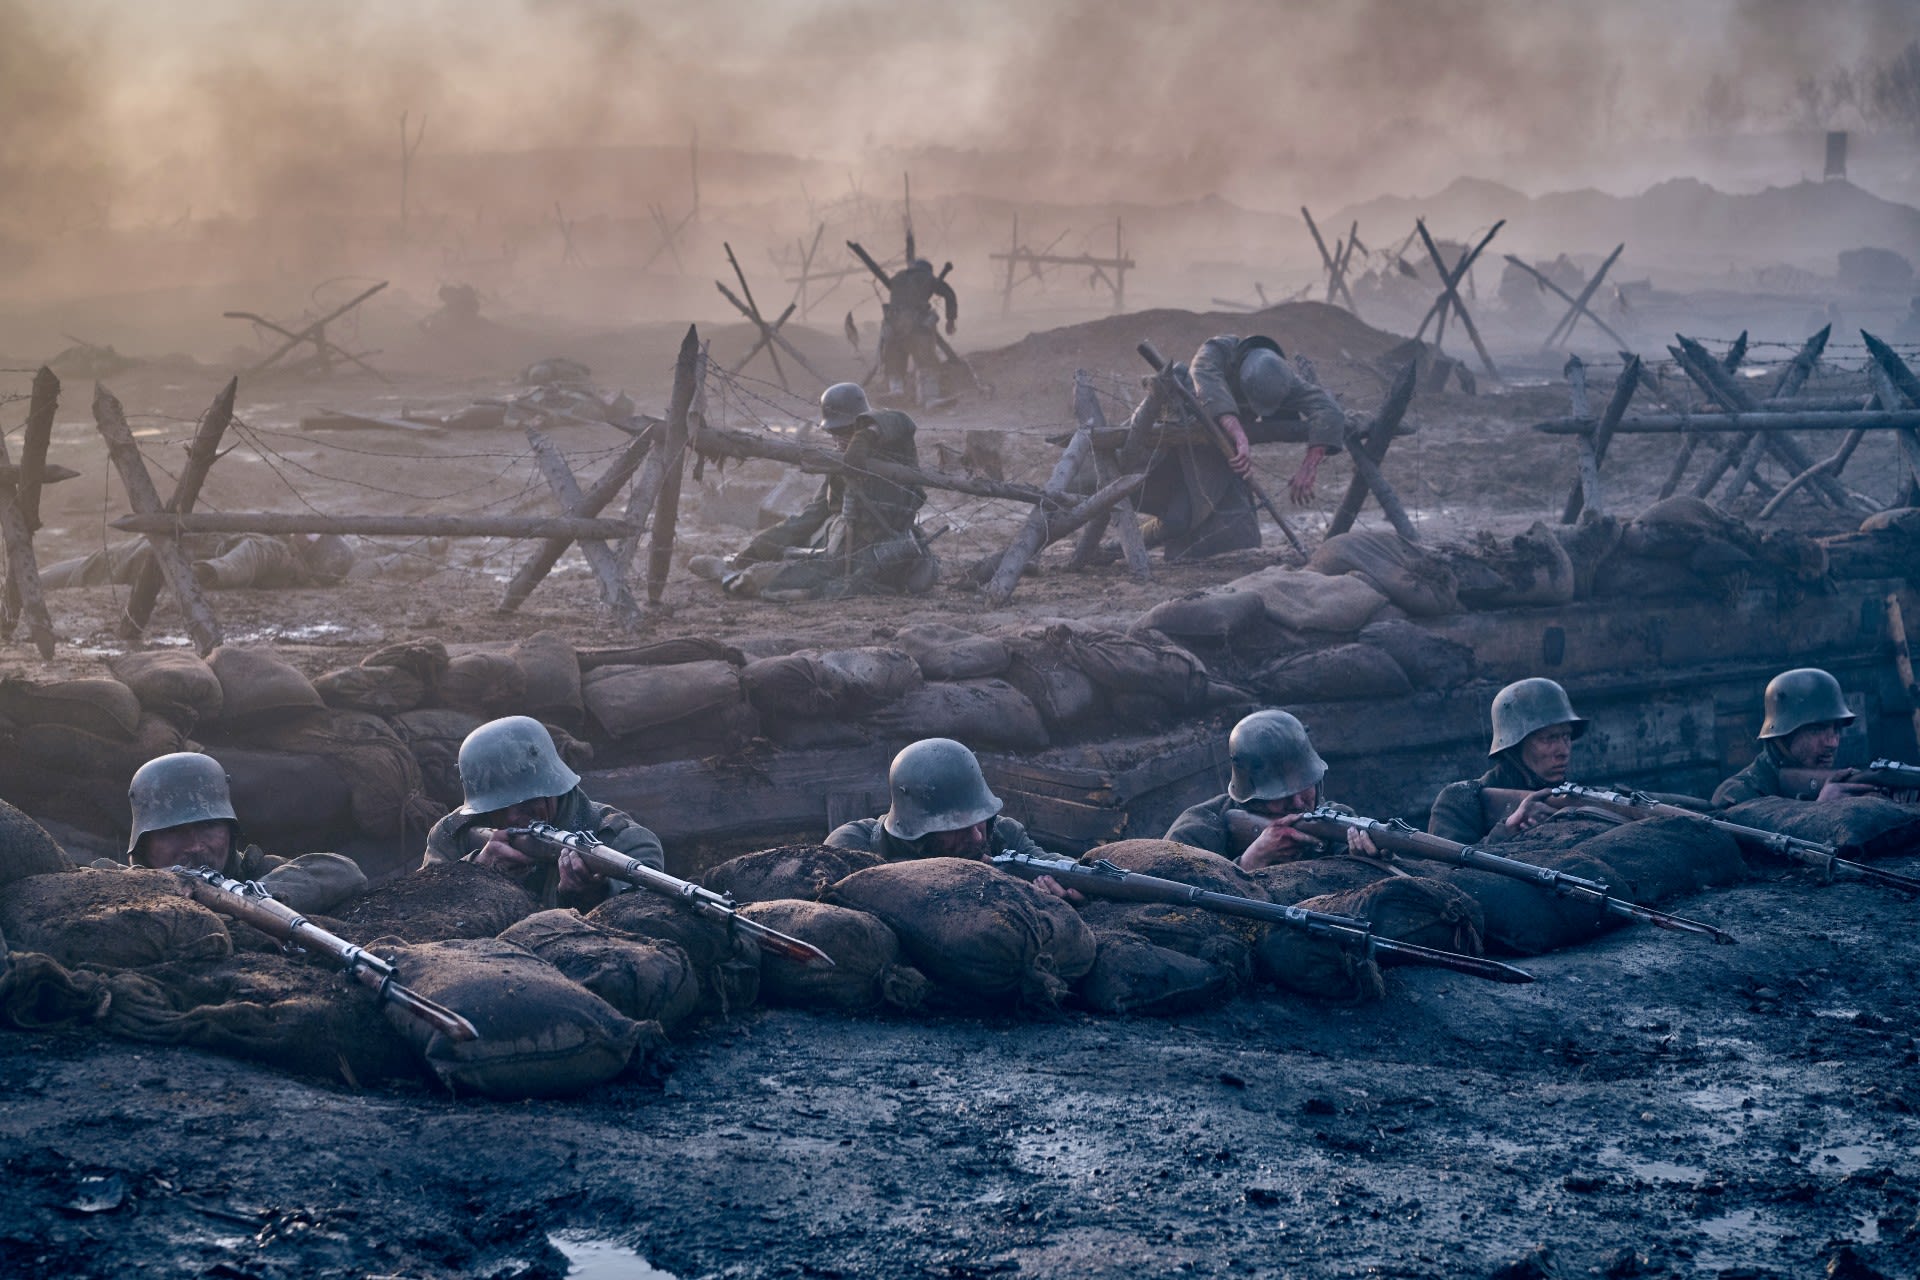 5 best war movies you should watch on Memorial Day